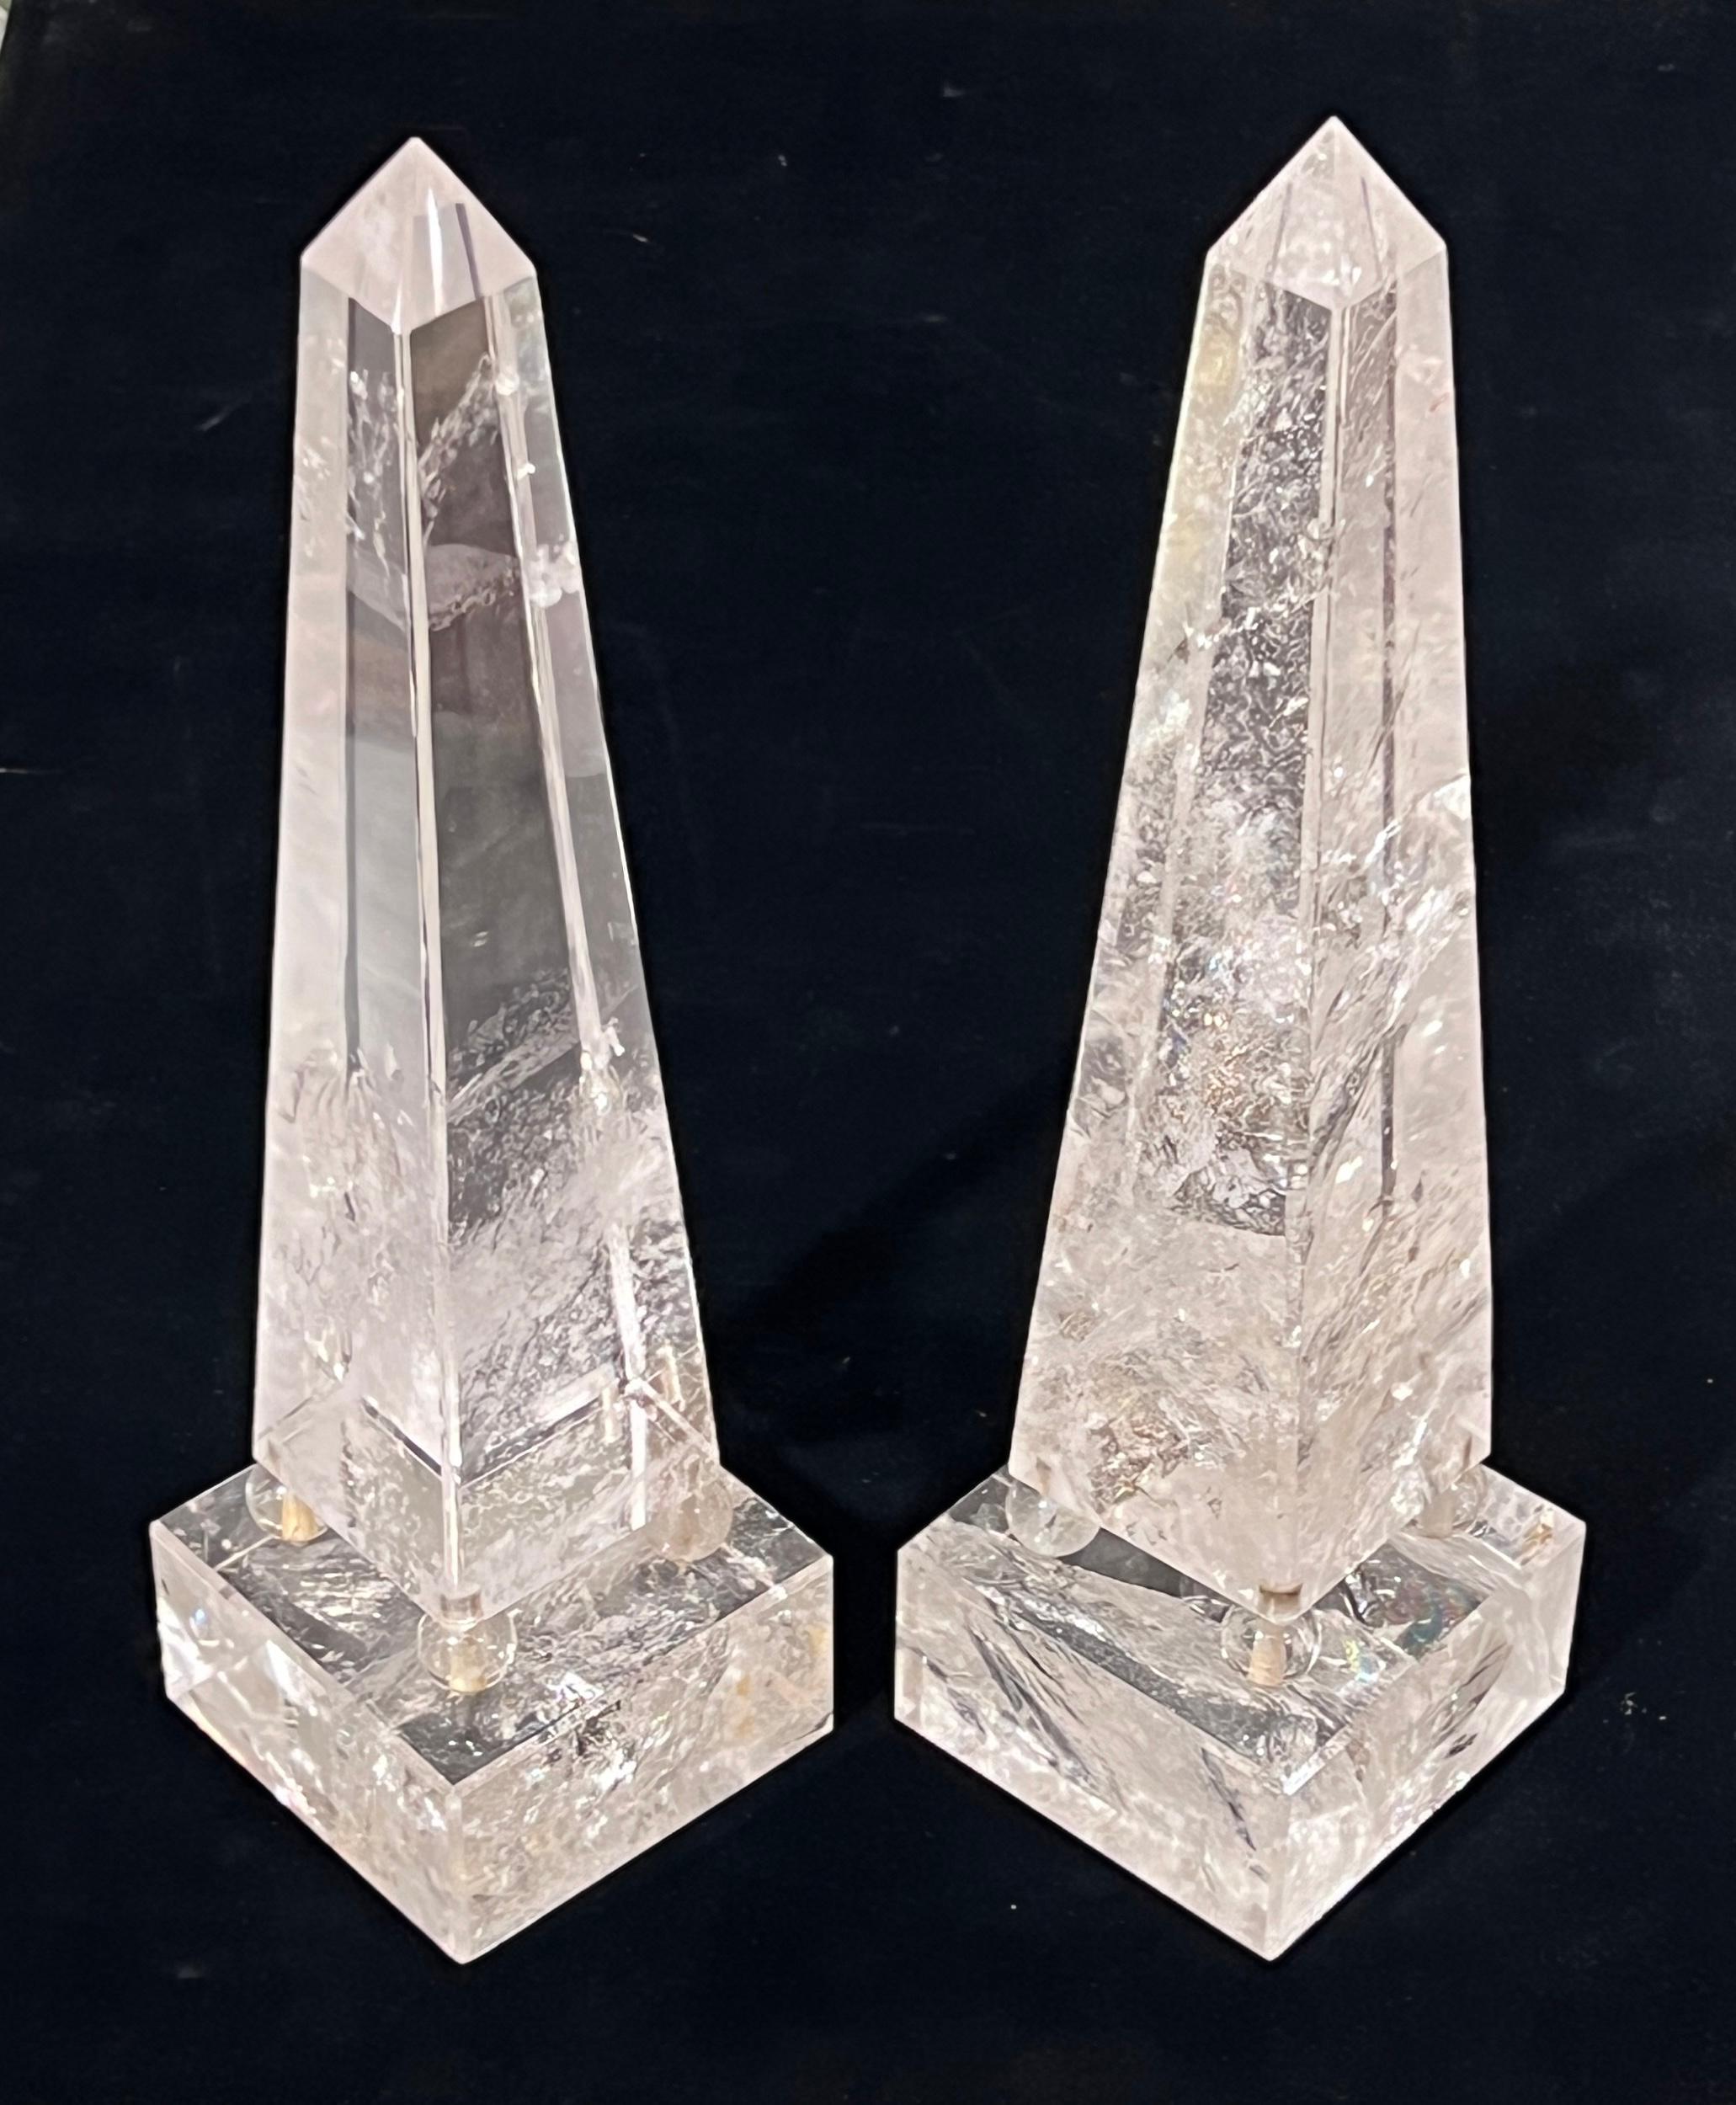 Pair of matching antique Art Deco  rock crystal obelisks of the finest quality, crystal clear with clear occlusions, and unique for their square pedestals and mounts with spherical rock crystal feet.